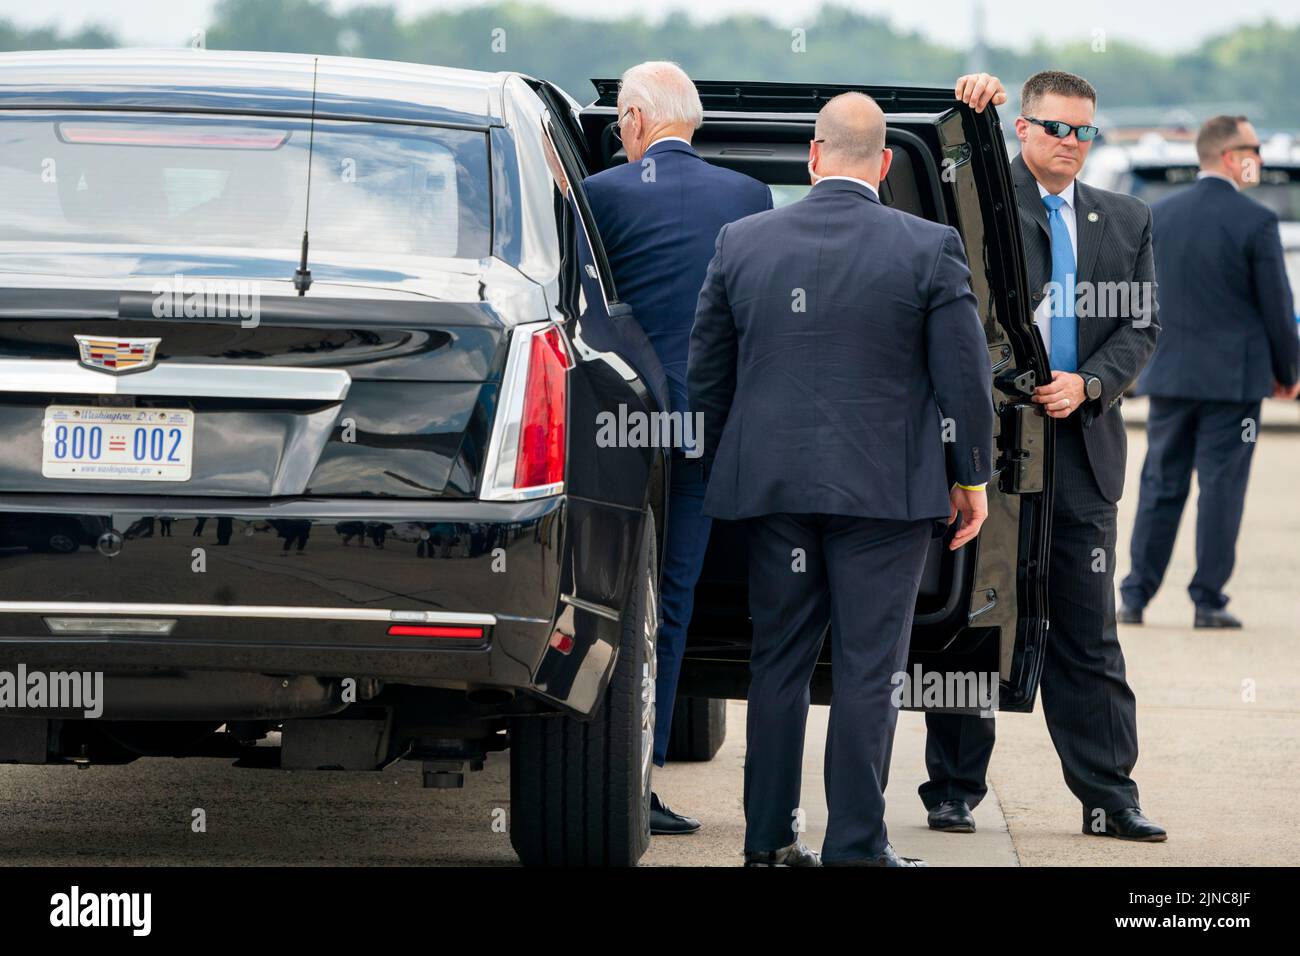 United States President Joe Biden gets out of his limo to board Air Force One at Joint Base Andrews, Maryland, USA, 10 August 2022.Credit: Shawn Thew/Pool via CNP /MediaPunch Stock Photo